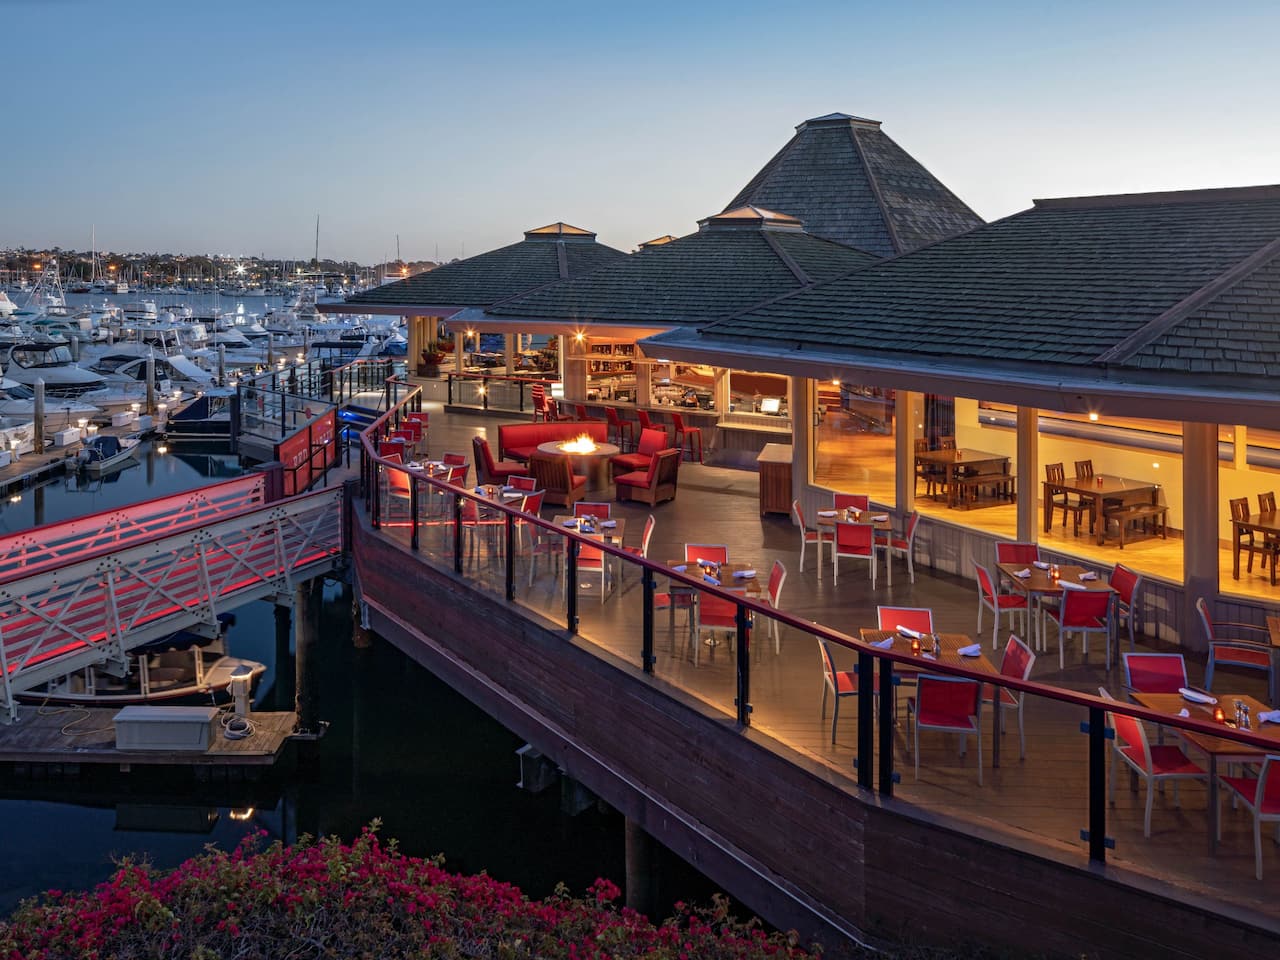 Outdoor dining area overlooking Mission Bay Marina